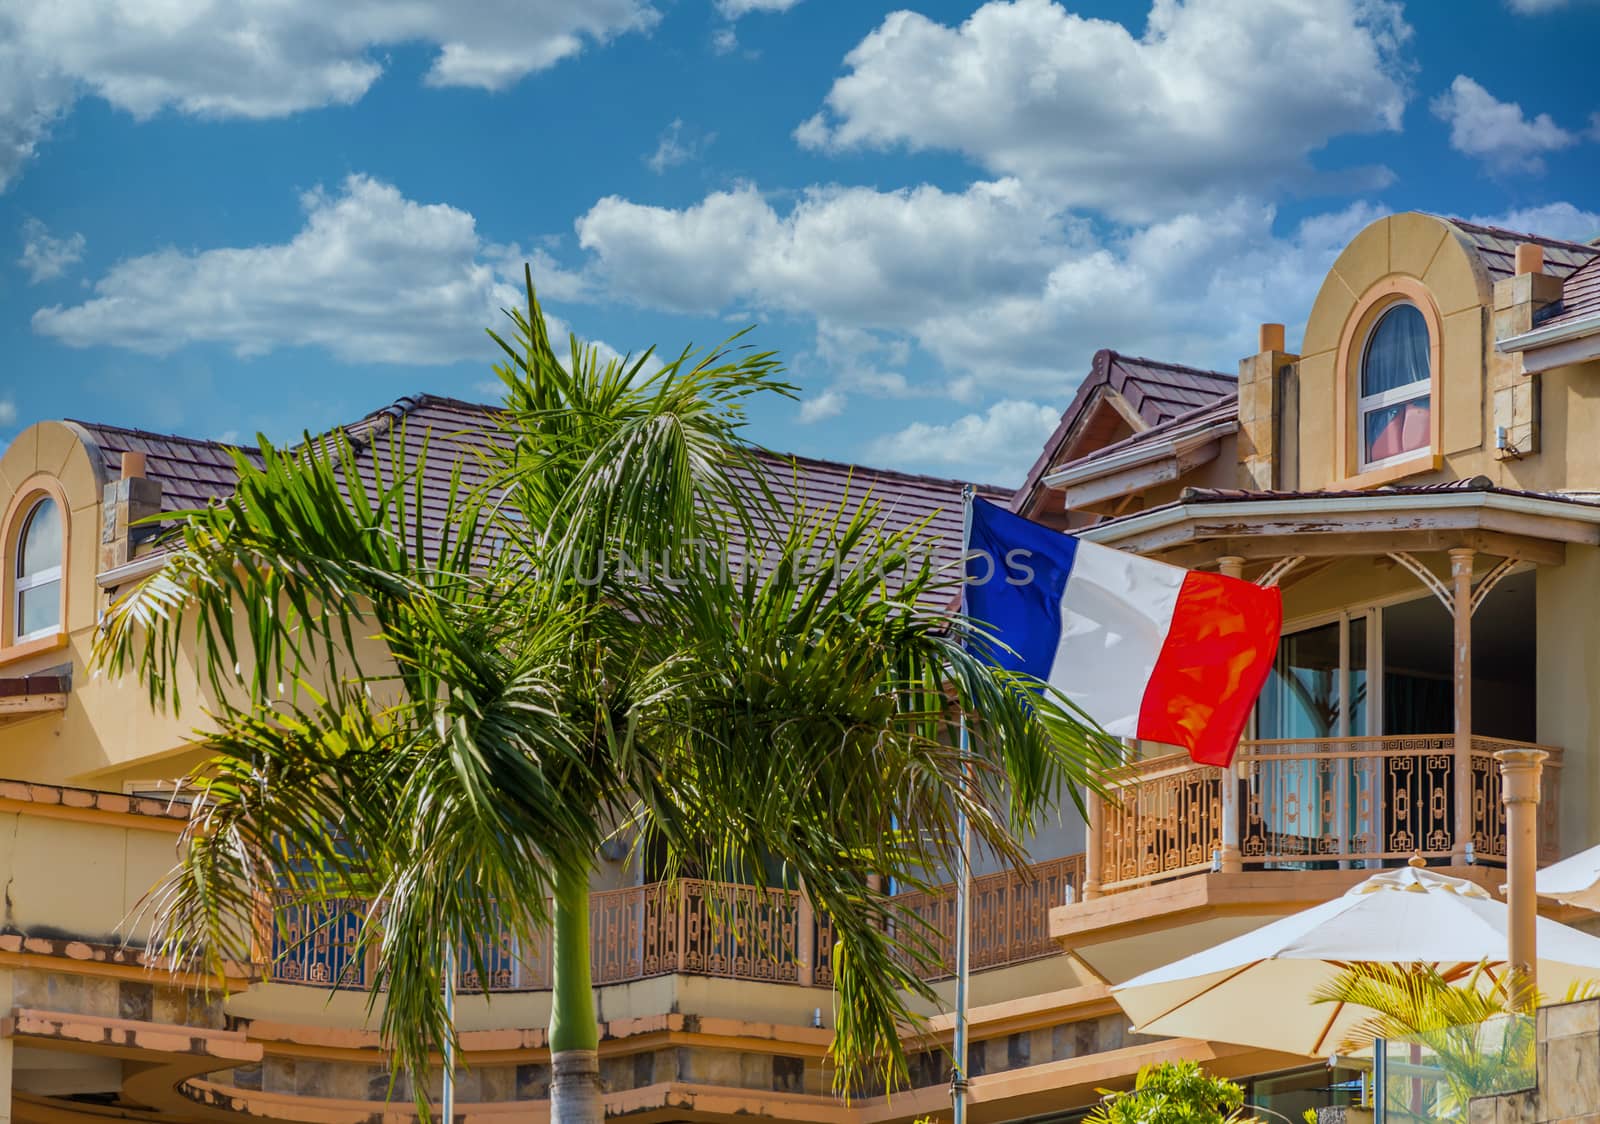 The French Flag Flying in Tropical Seaport of Marigot, Saint Martin